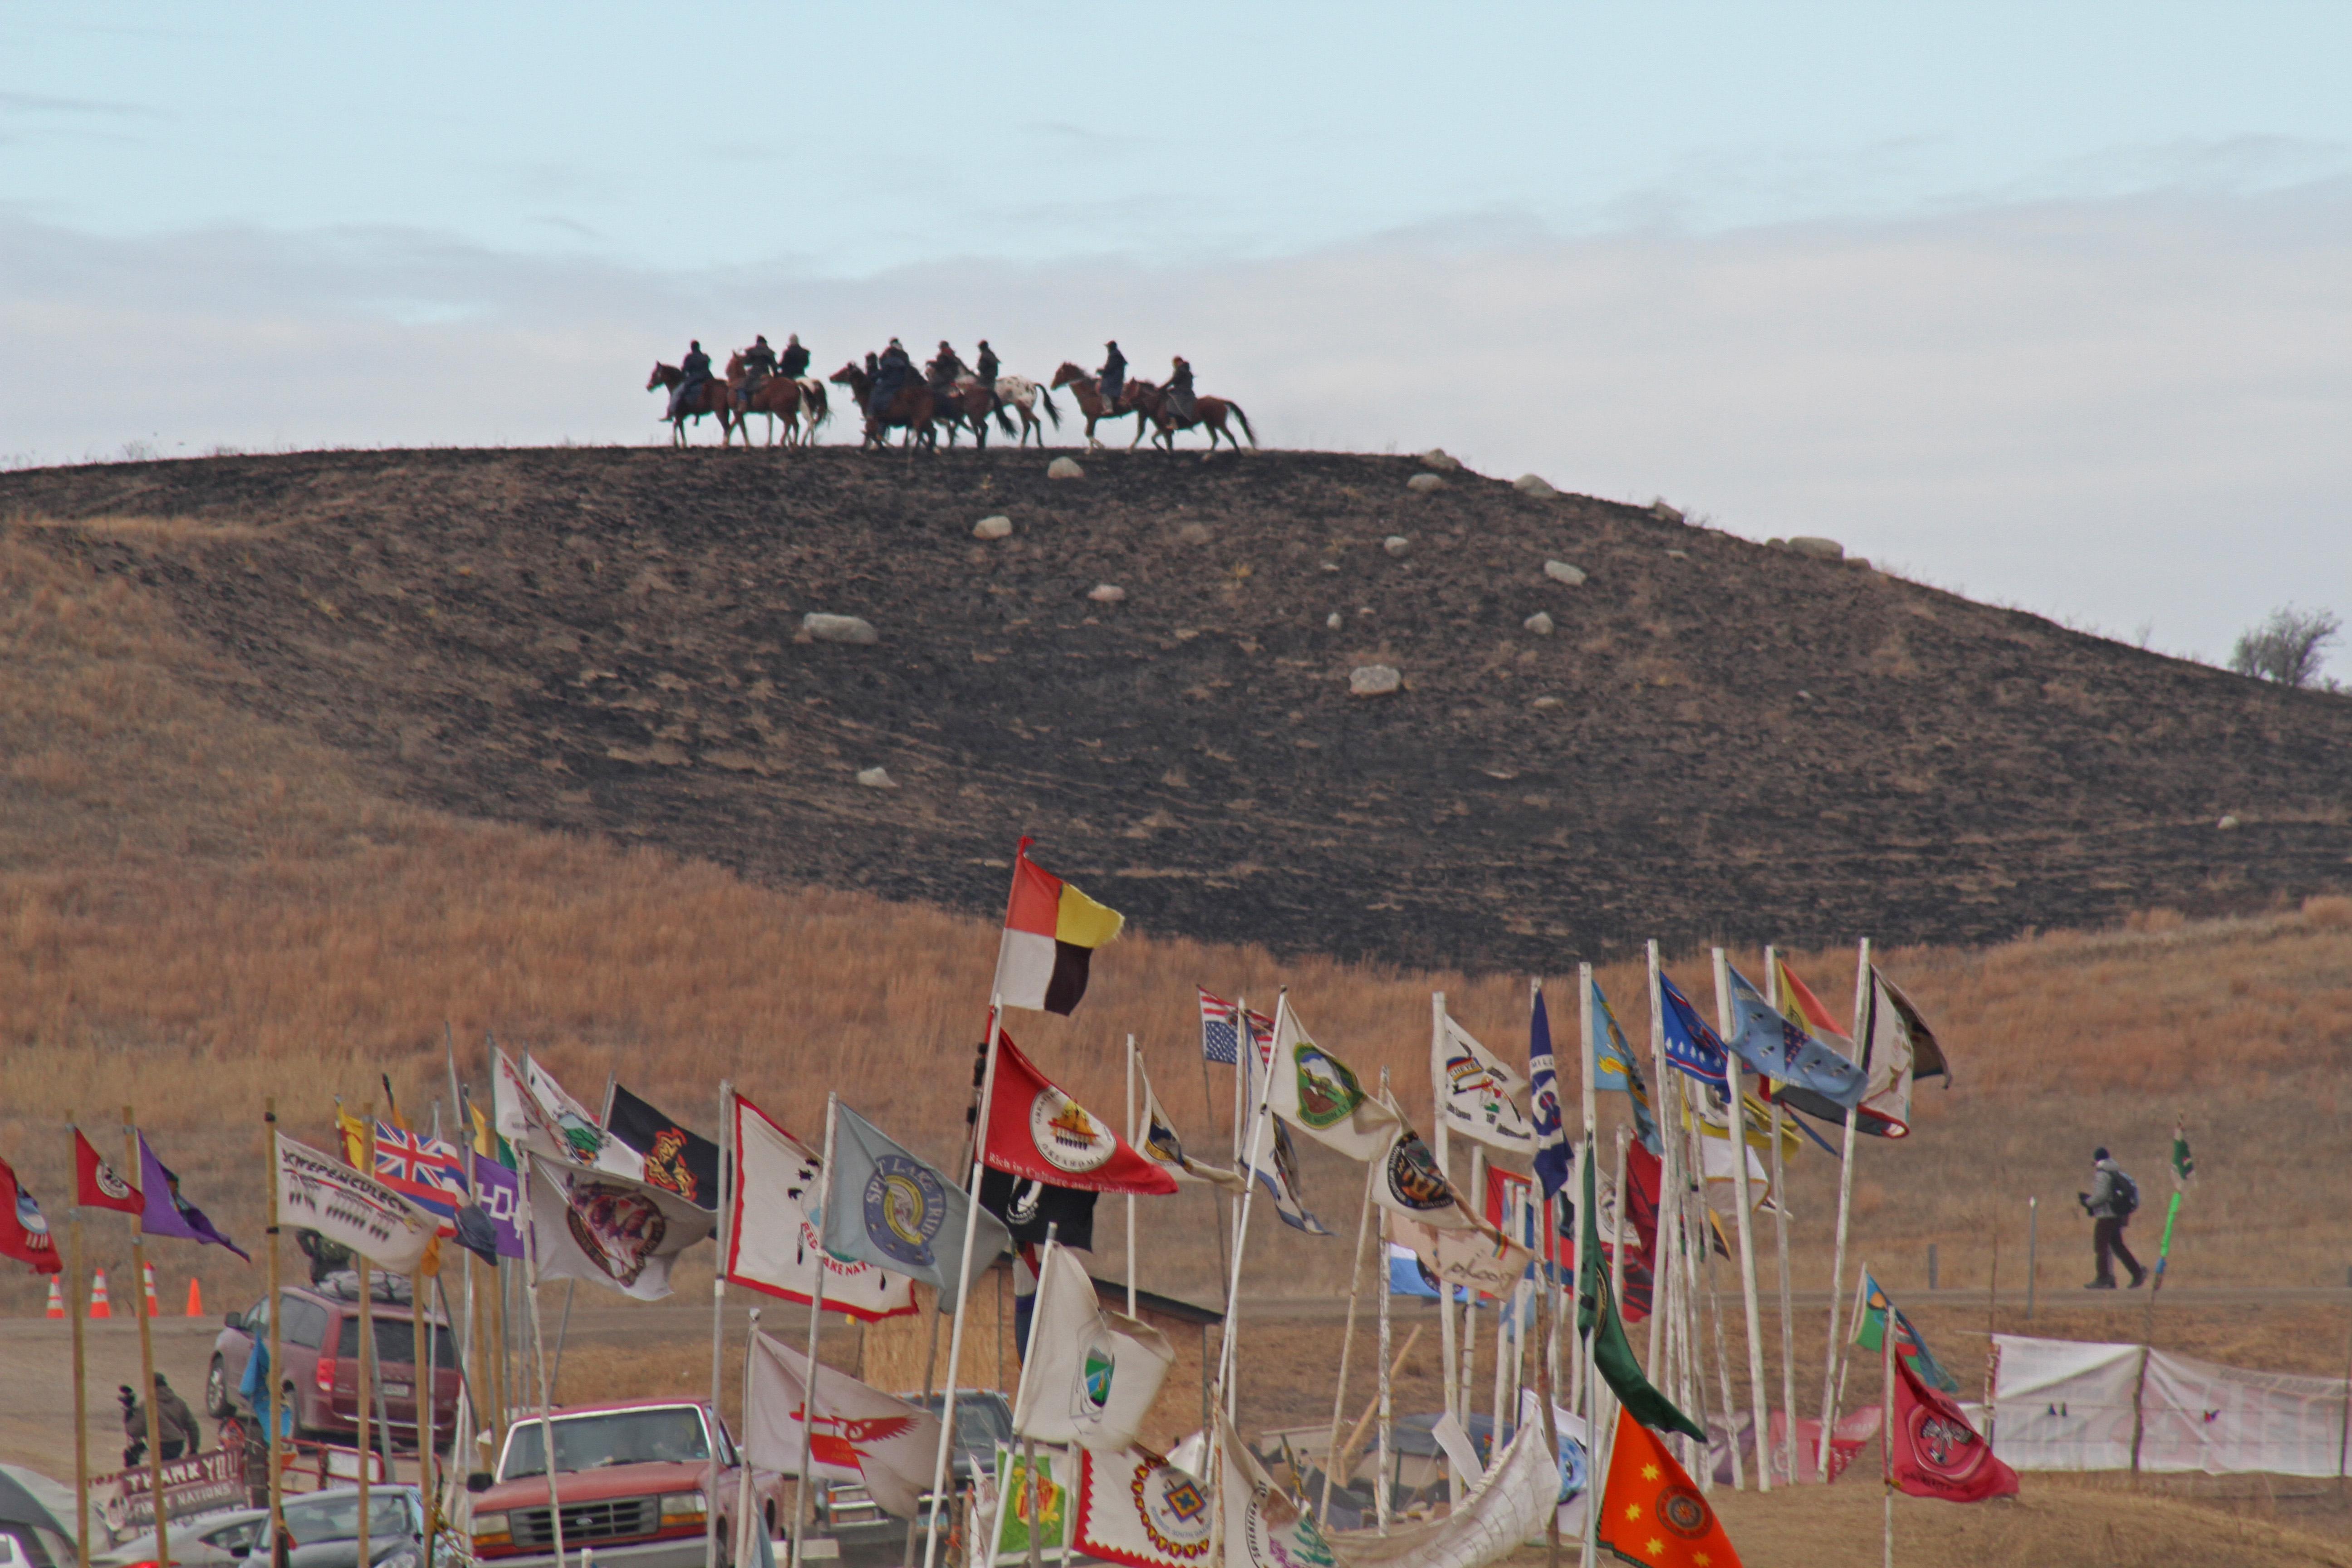 Riders on horseback overlook Oceti Sakowin Camp occupied by Standing Rock protesters.